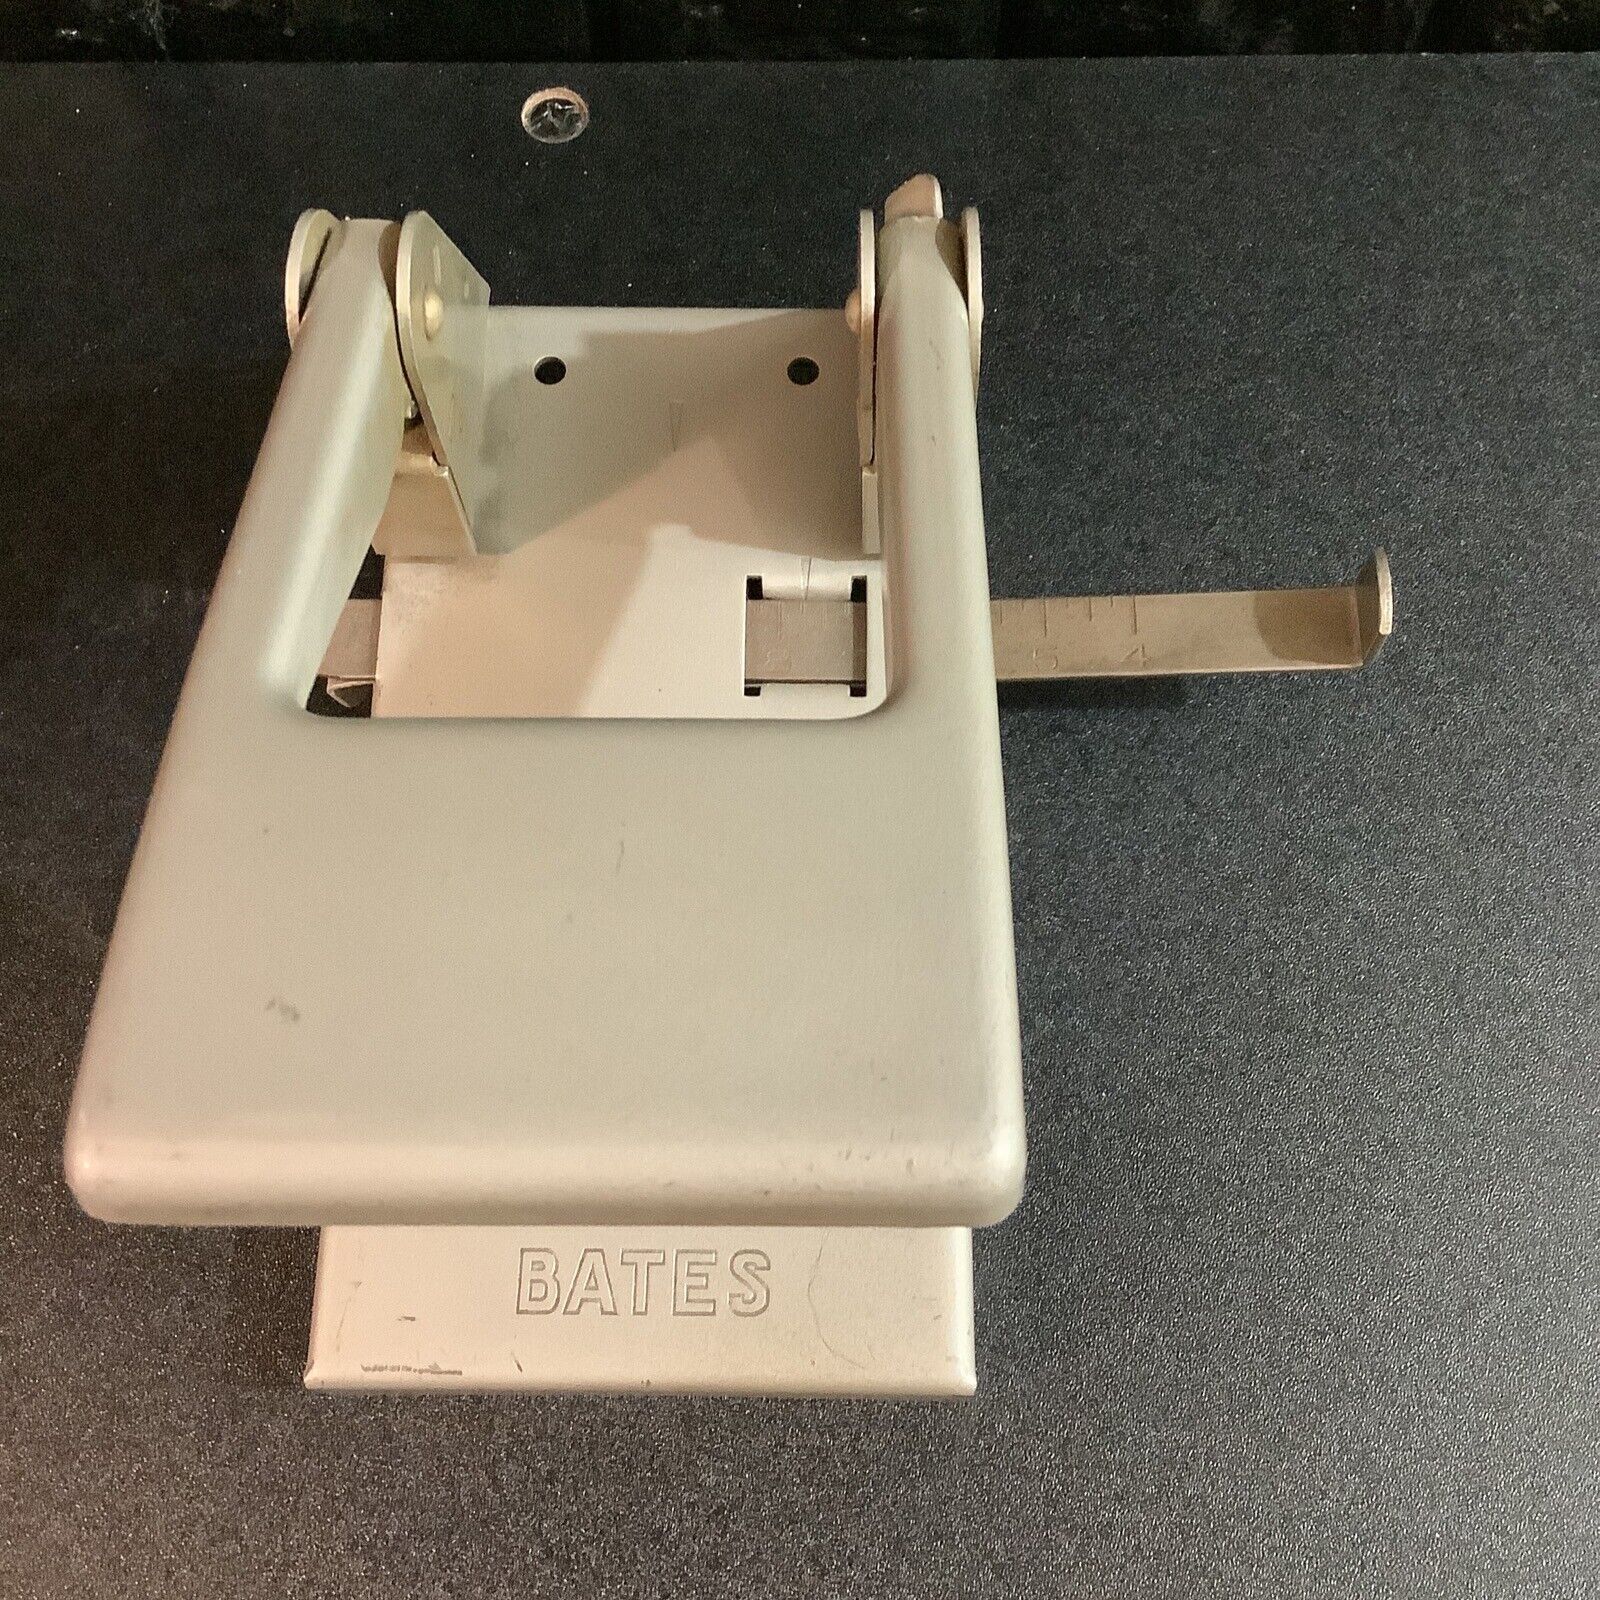 Bates Perforator Two Hole Punch Model 2 Gray Metal Vintage